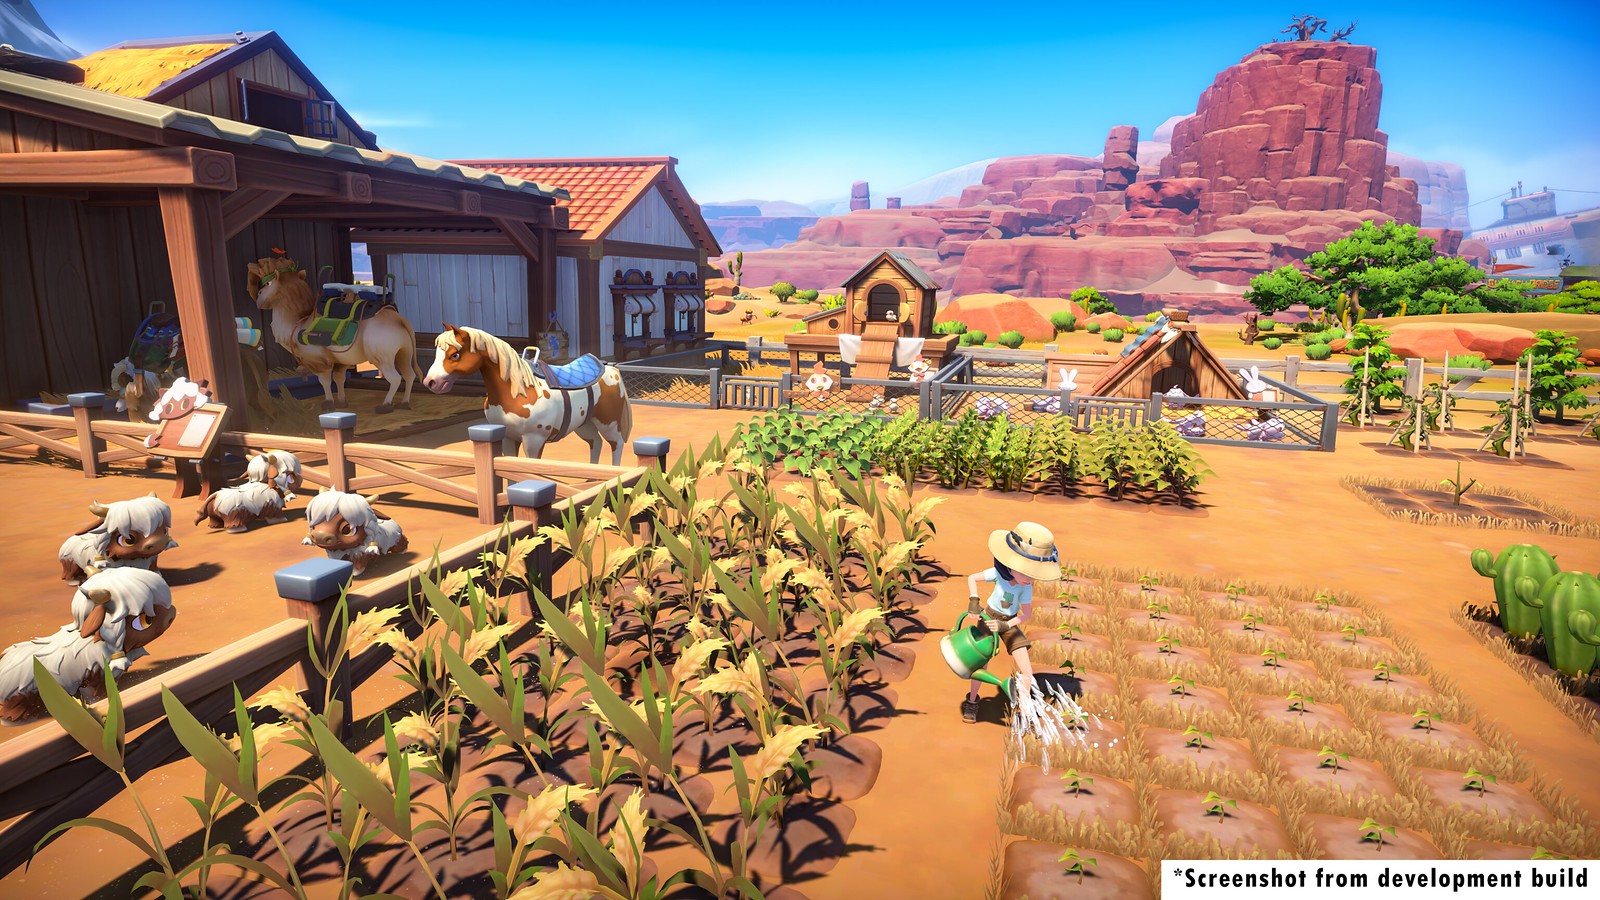 Town sim meets action adventure in My Time at Sandrock, out this summer – PlayStation.Blog